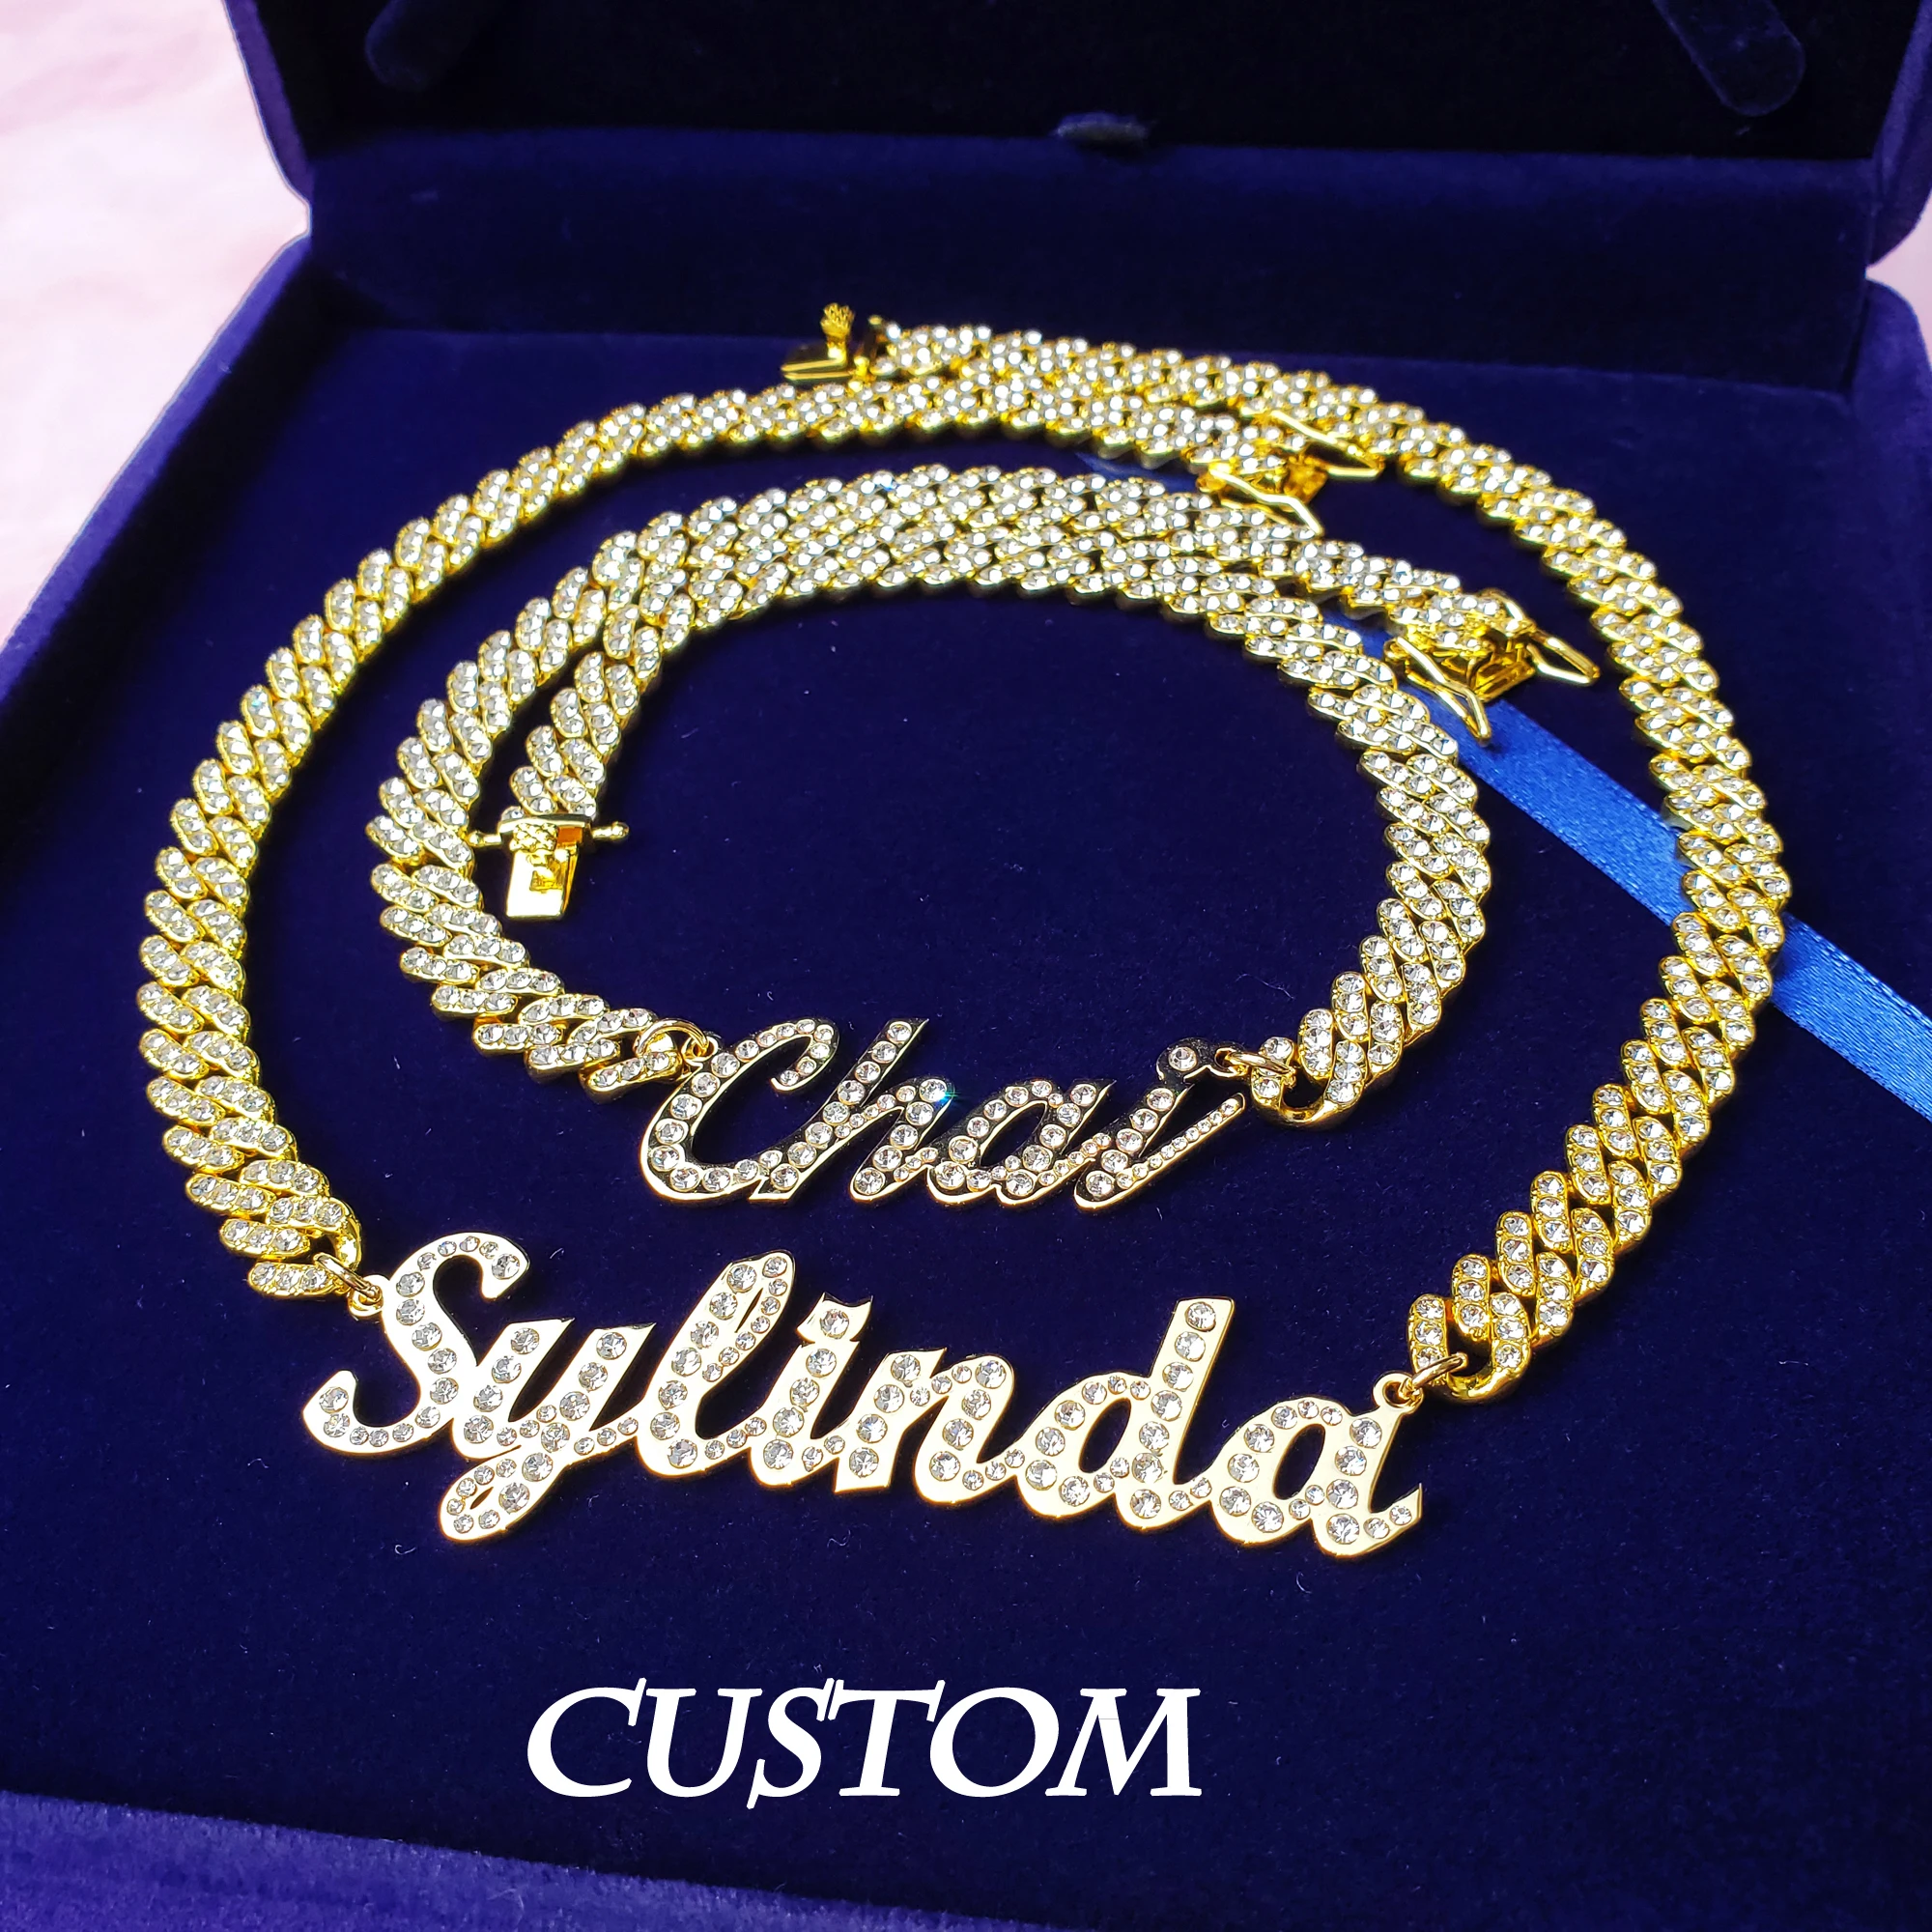 Personalized Name Necklace Stainless Steel with Rhinestone Cuban Chain Choker Necklace Perfect Gift for Her Part Prom Jewelry 20mm stainless steel watchband for huami amazfit gts samsung gear s2 classic garmin vivoactive 3 universal rhinestone decorative d chain watch strap silver